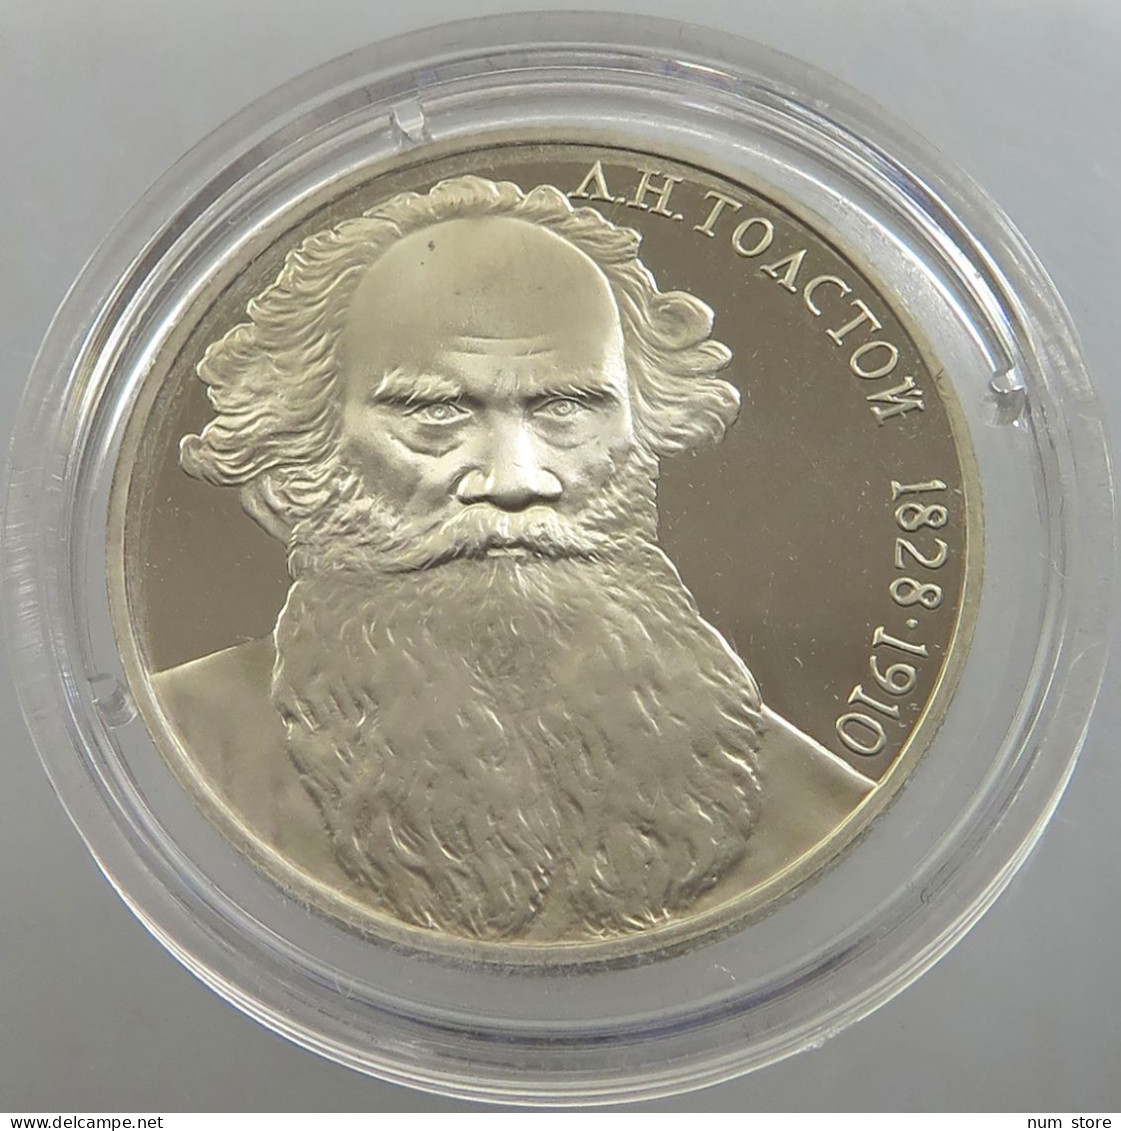 RUSSIA USSR 1 ROUBLE 1988 TOLSTOI PROOF #sm14 0481 - Rusland